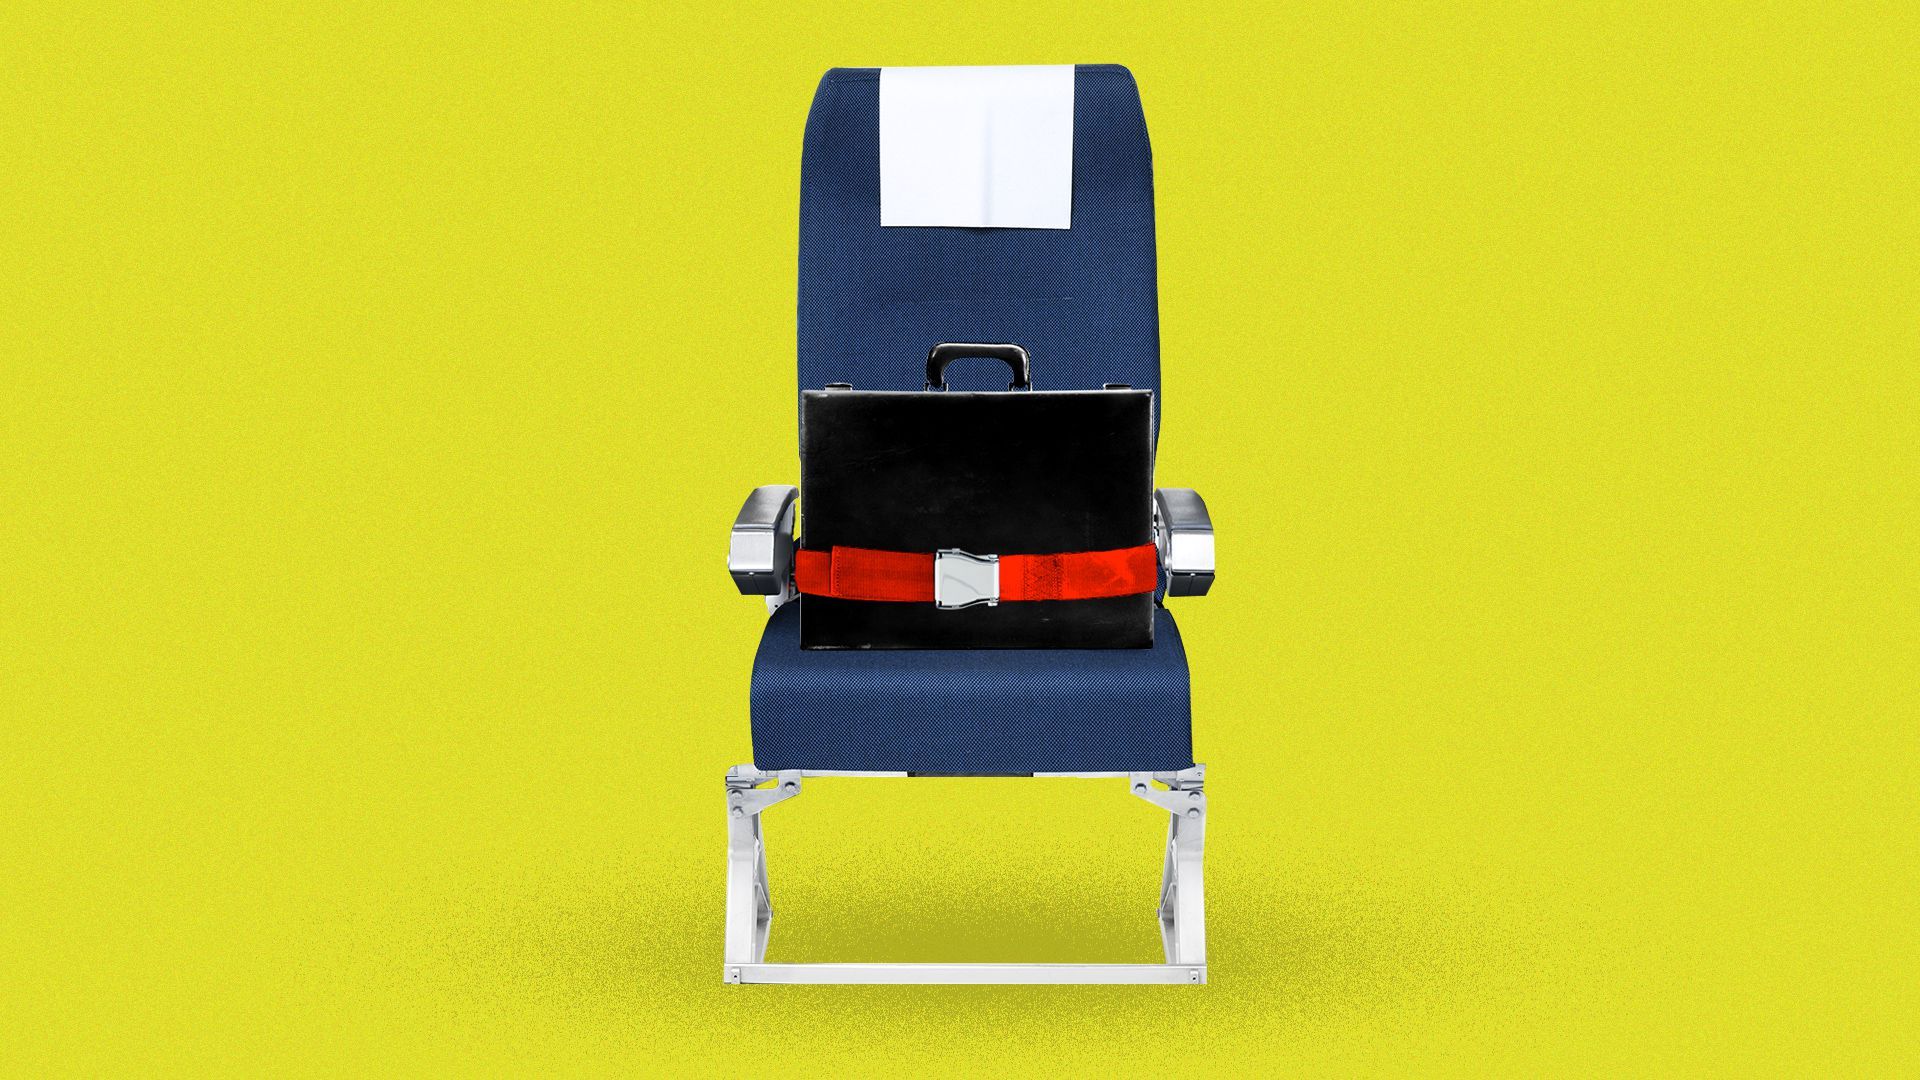 Illustration of briefcase in an airplane seat with a safety belt on